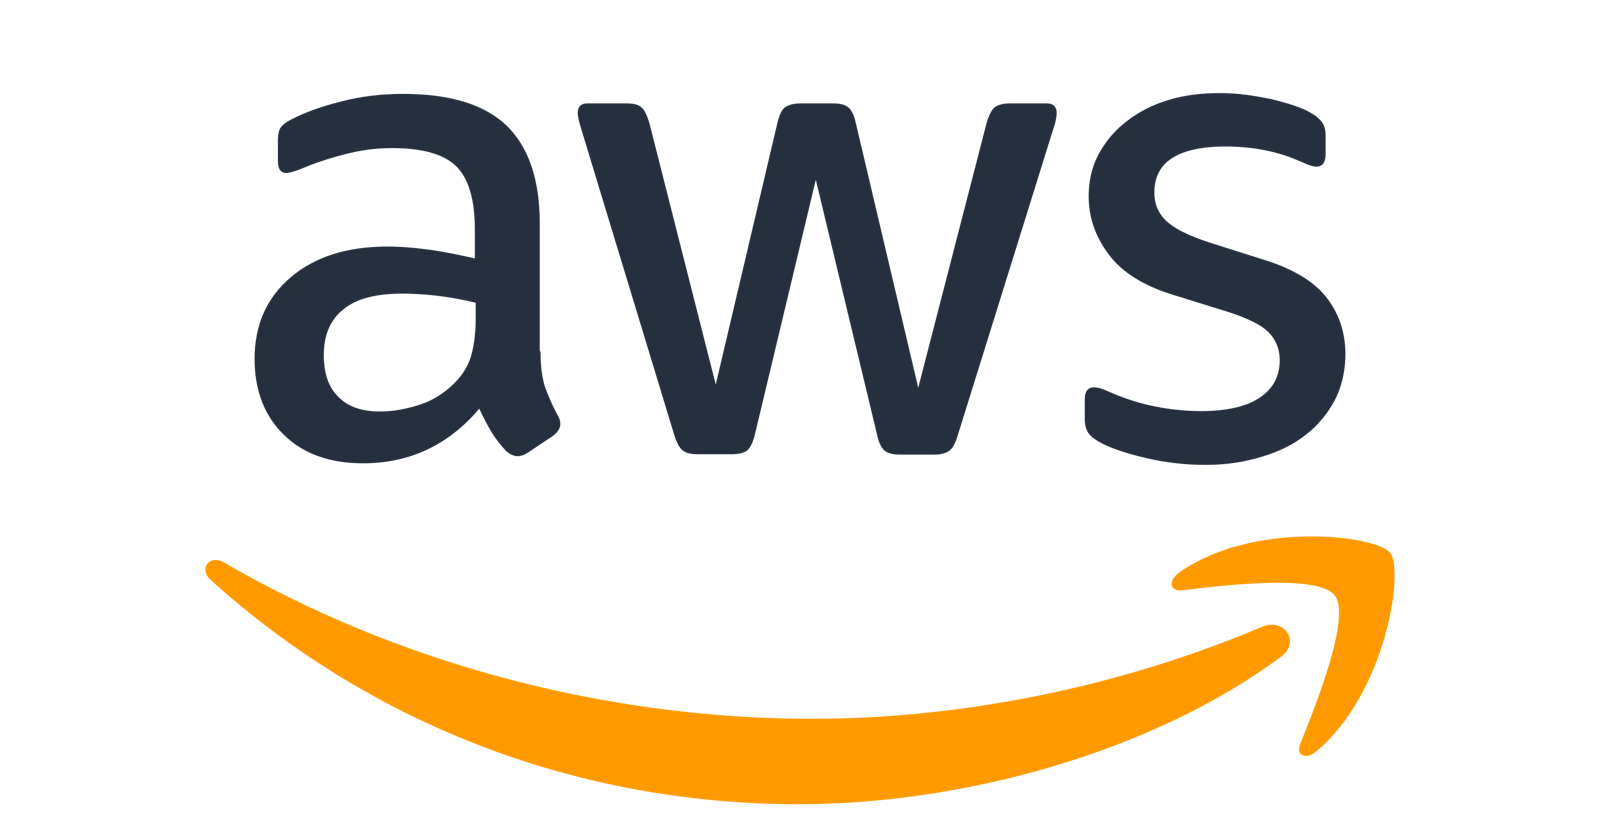 Upload/Download/Delete any file on AWS S3 bucket using node.js